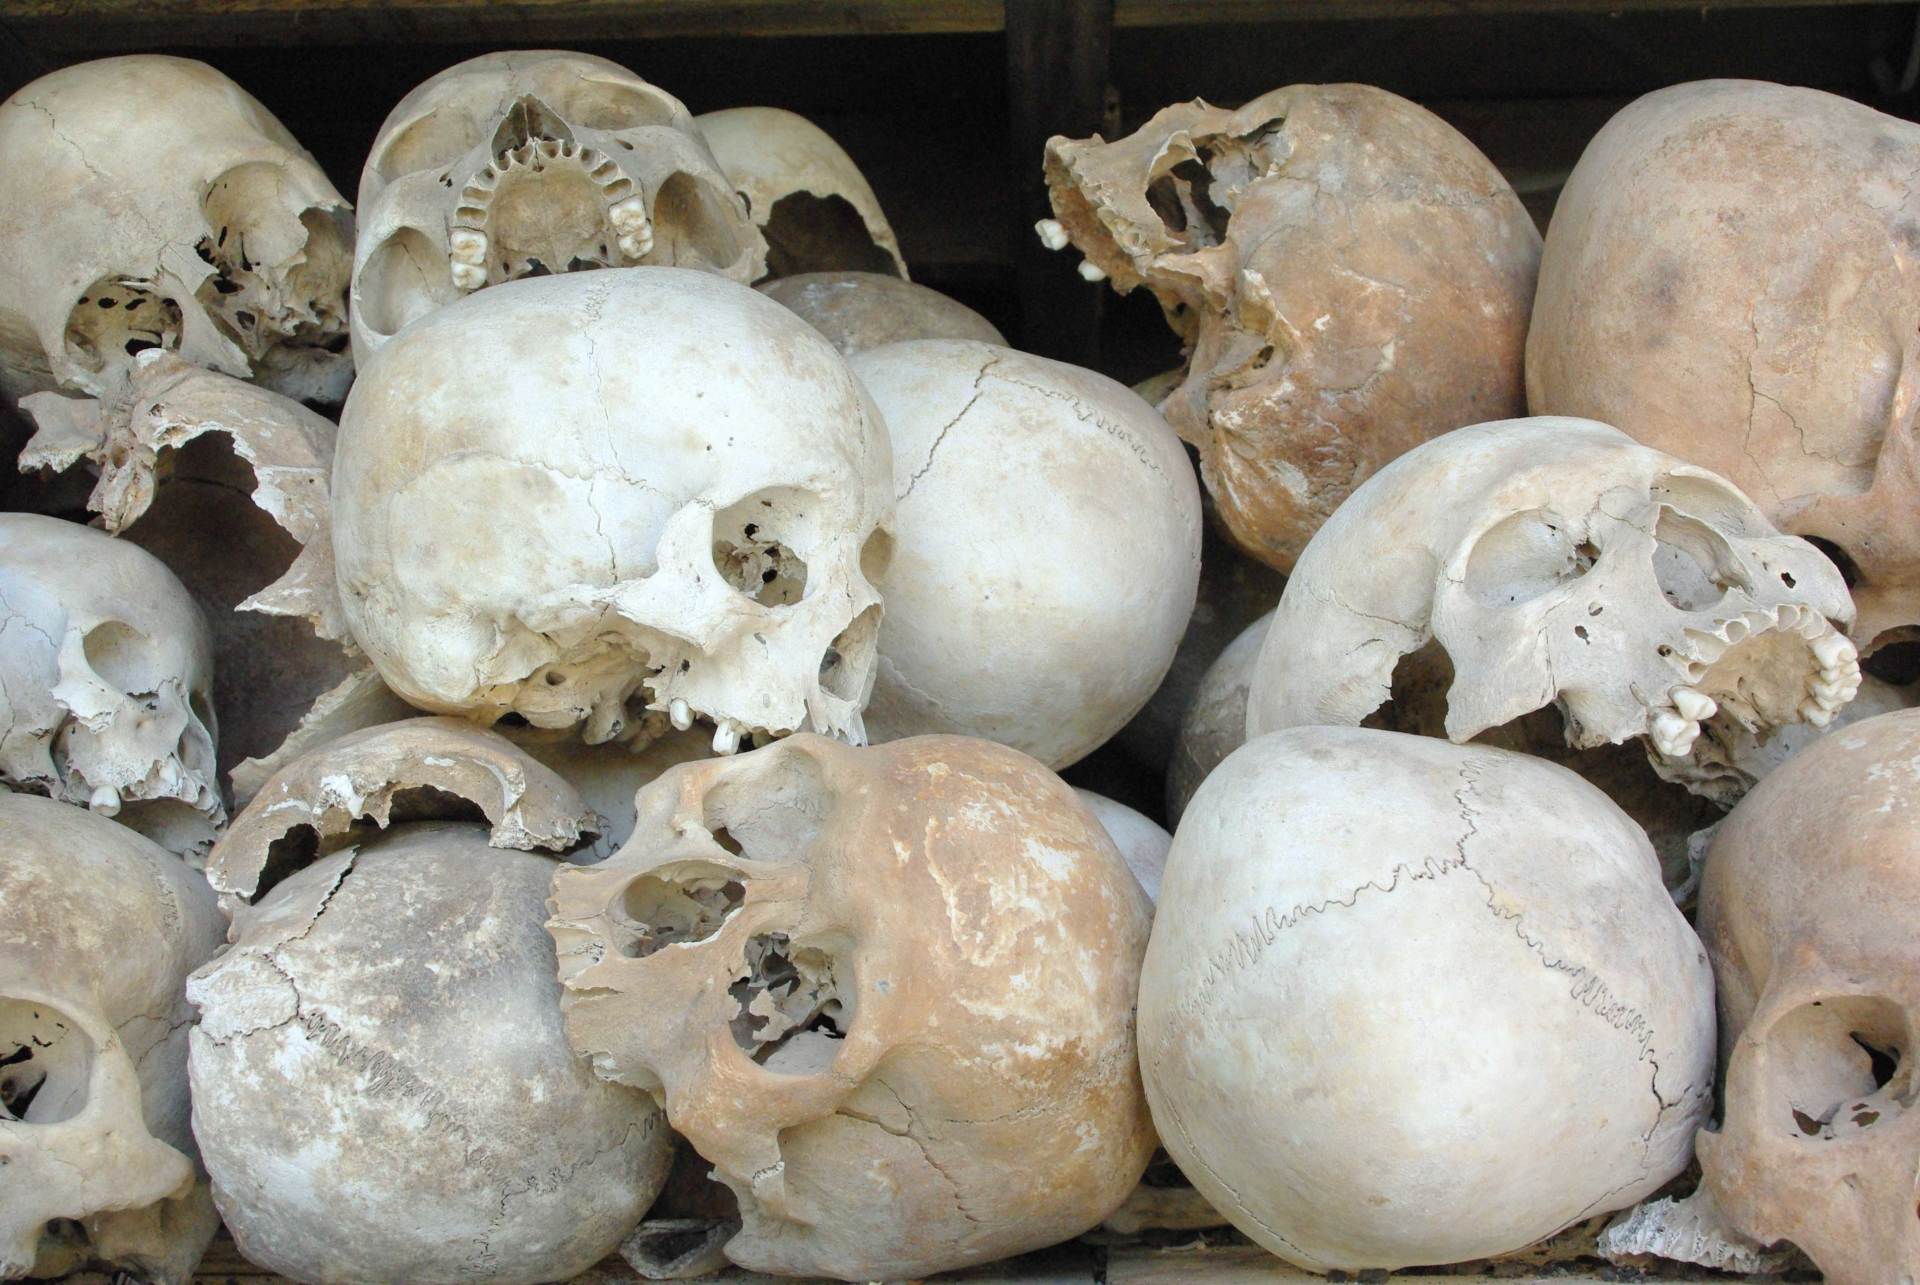 Skulls recovered at The Killing Fields